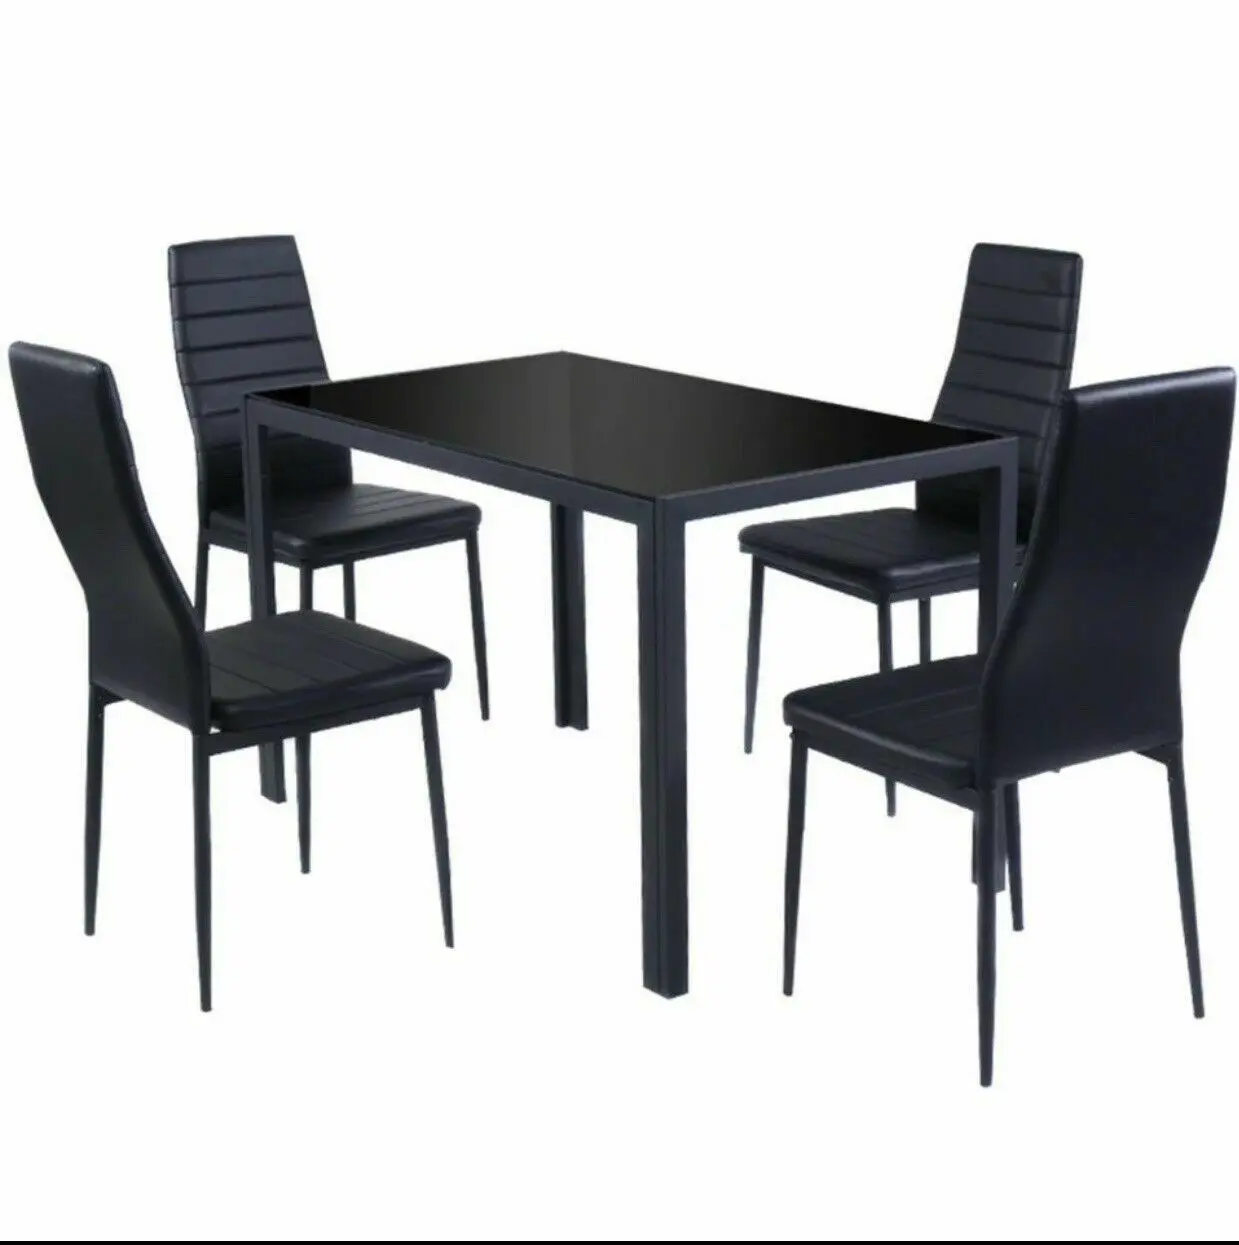 5pcs Modern 1 4 Dining Room Set Rectangular Metal Glass Kitchen Room Dining Table Set Buy 1 4 Dining Room Set Rectangular Glass Table Kitchen Room Dining Table Set Product On Alibaba Com